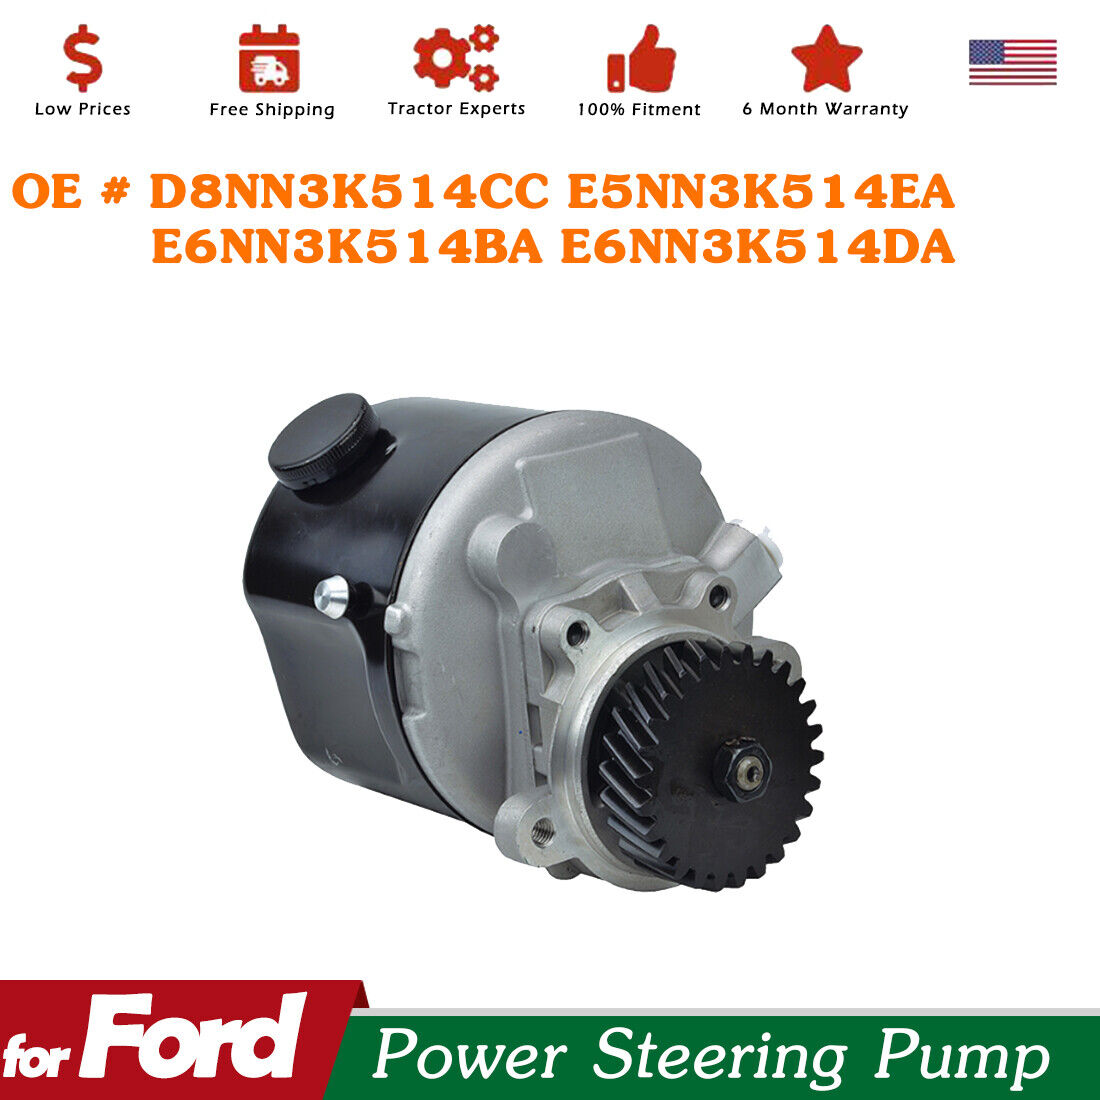 Power Steering Pump - Economy Ford 5000 4600 2600 4100 6600 4110 3600 4000 3000